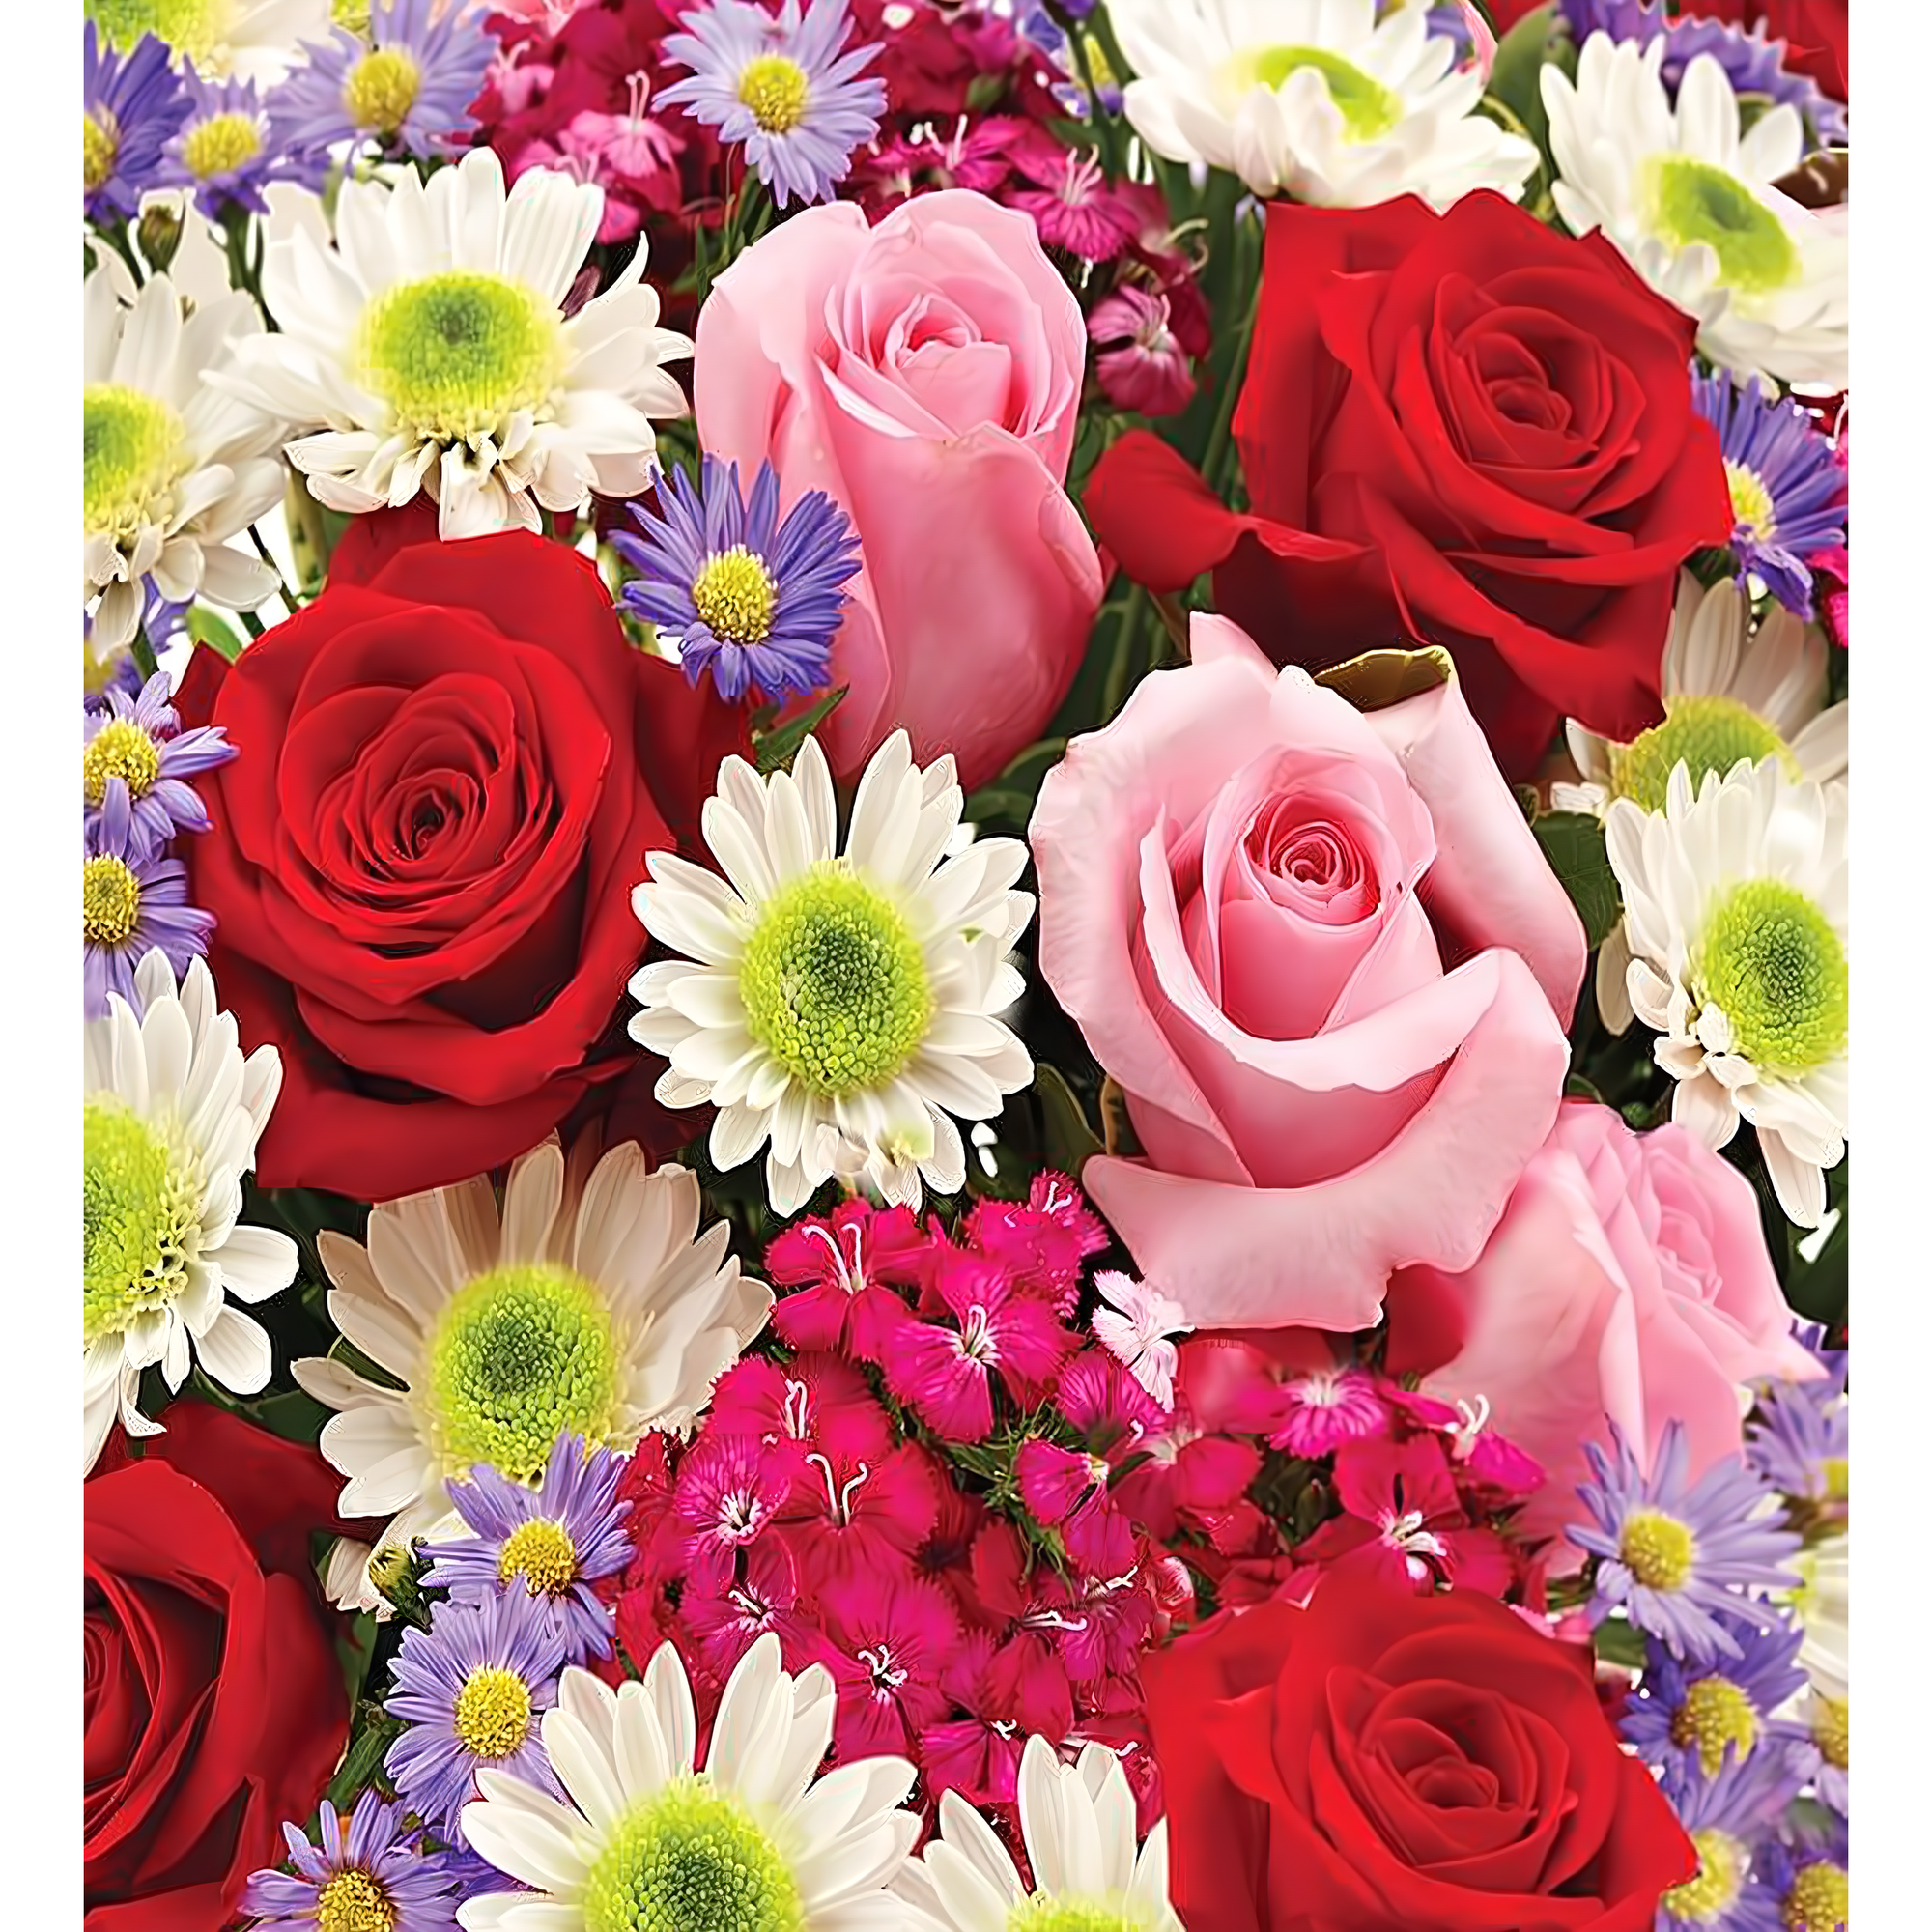 Manhattan Flower Delivery - Florist Choice - Occasions > Anniversary